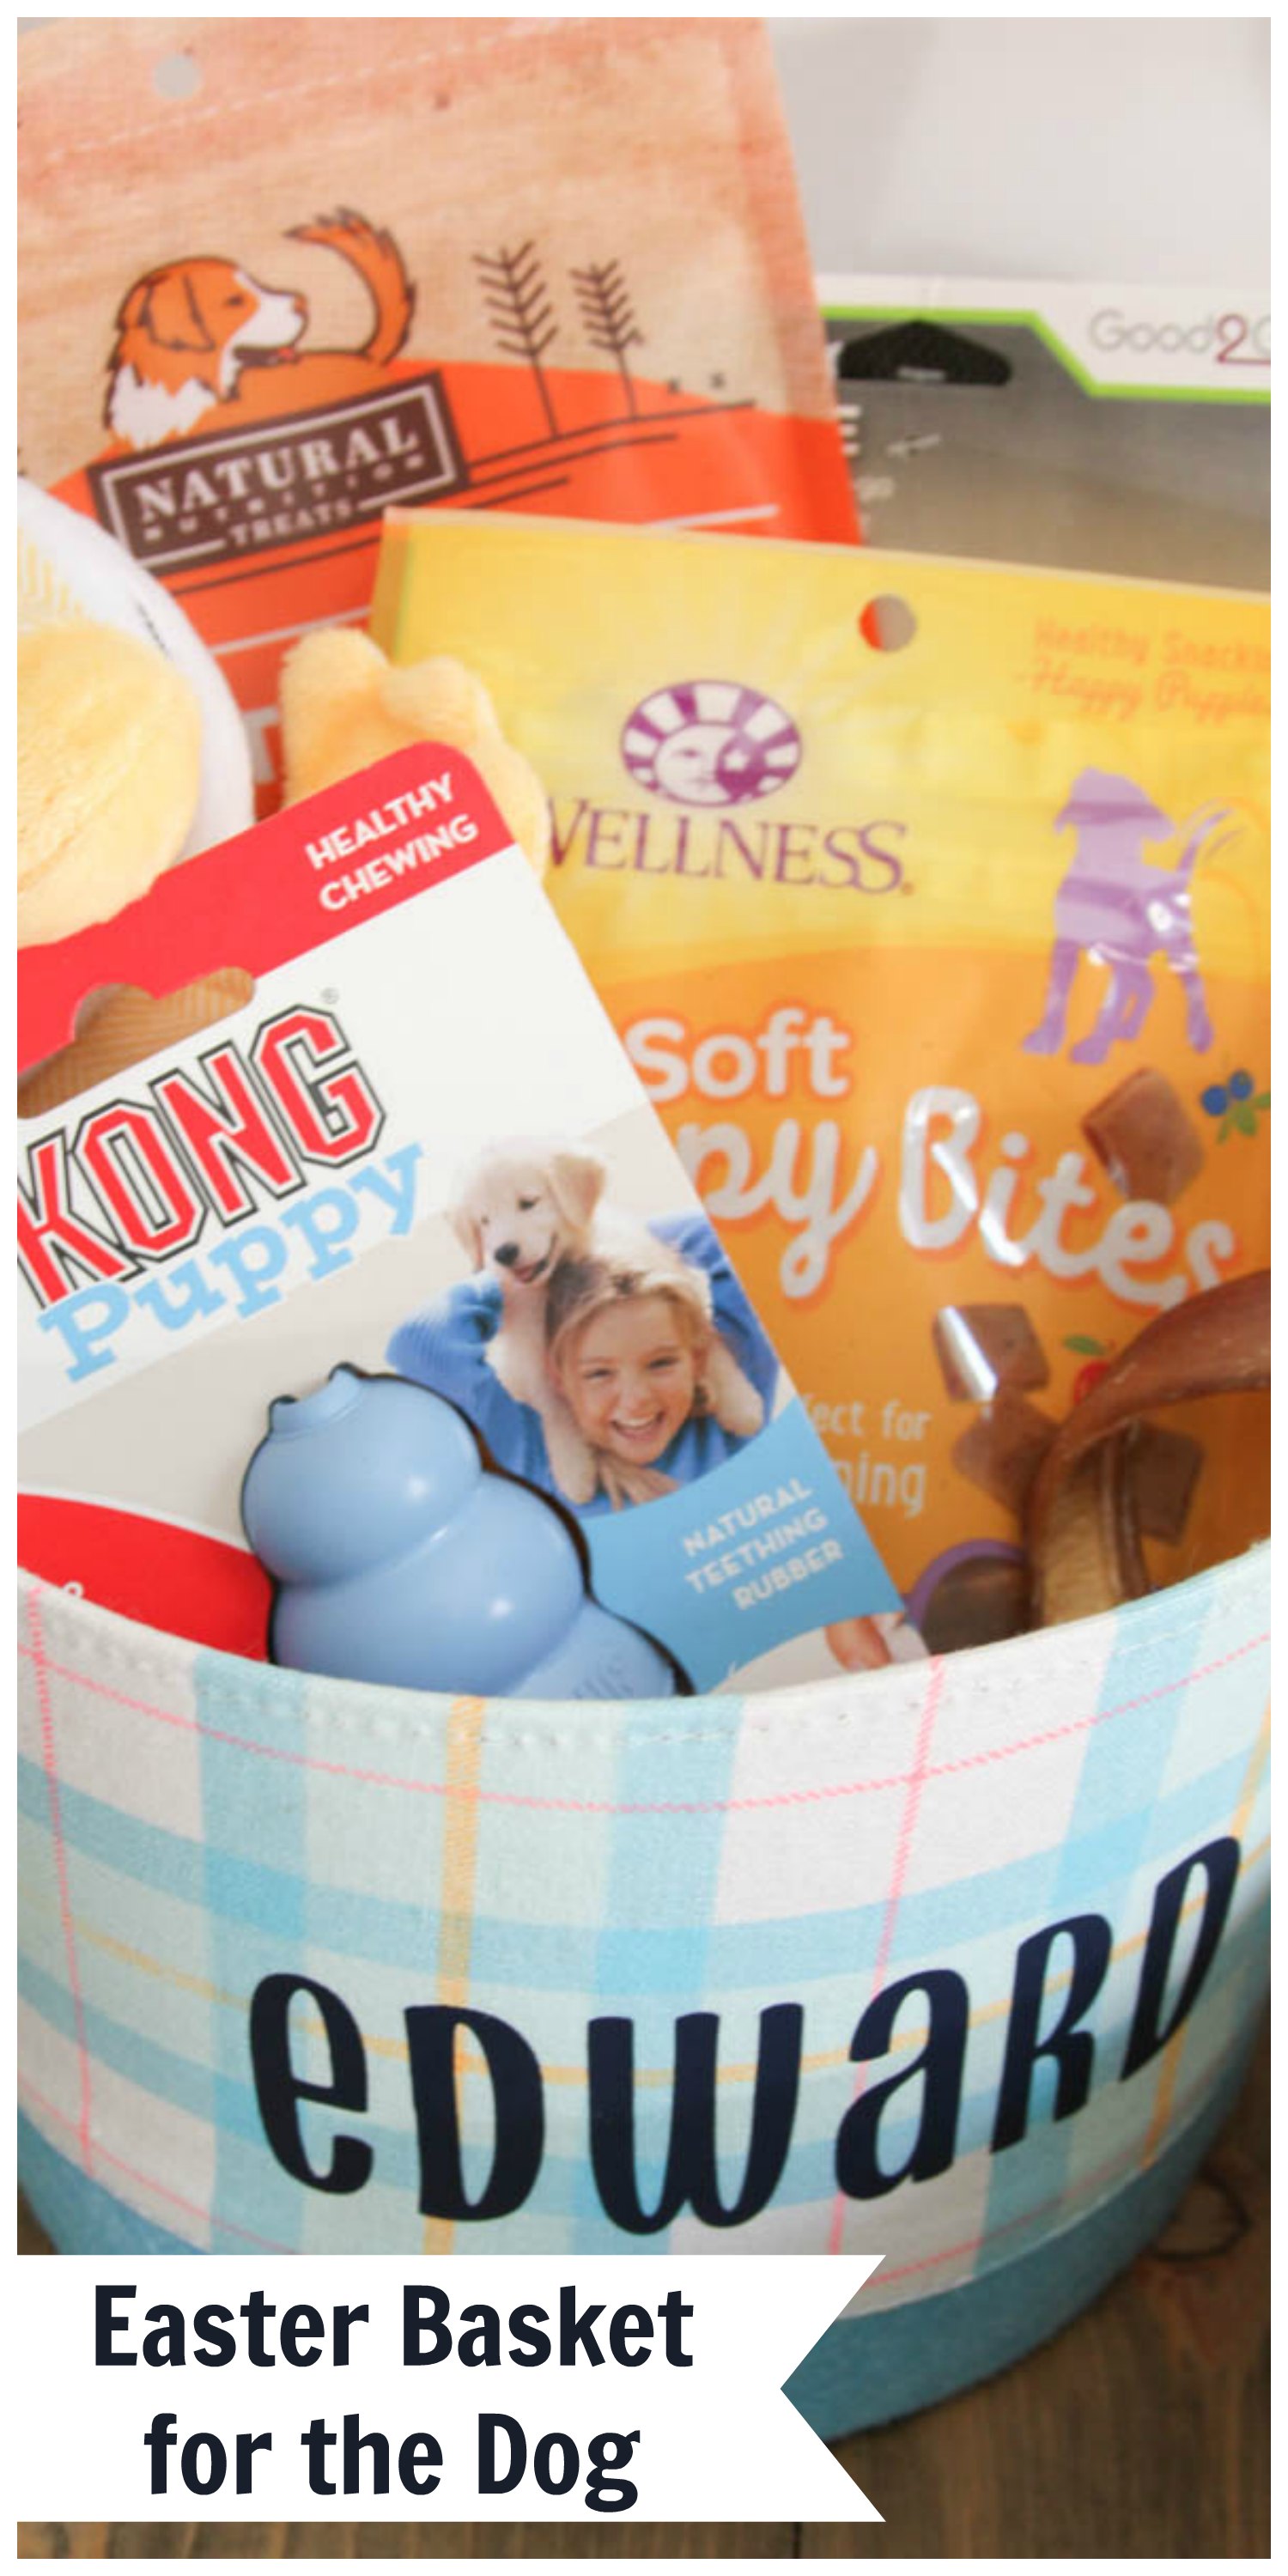 Everyday Party Magazine Easter Basket for the Dog #PetCo #EasterBasket #DIY